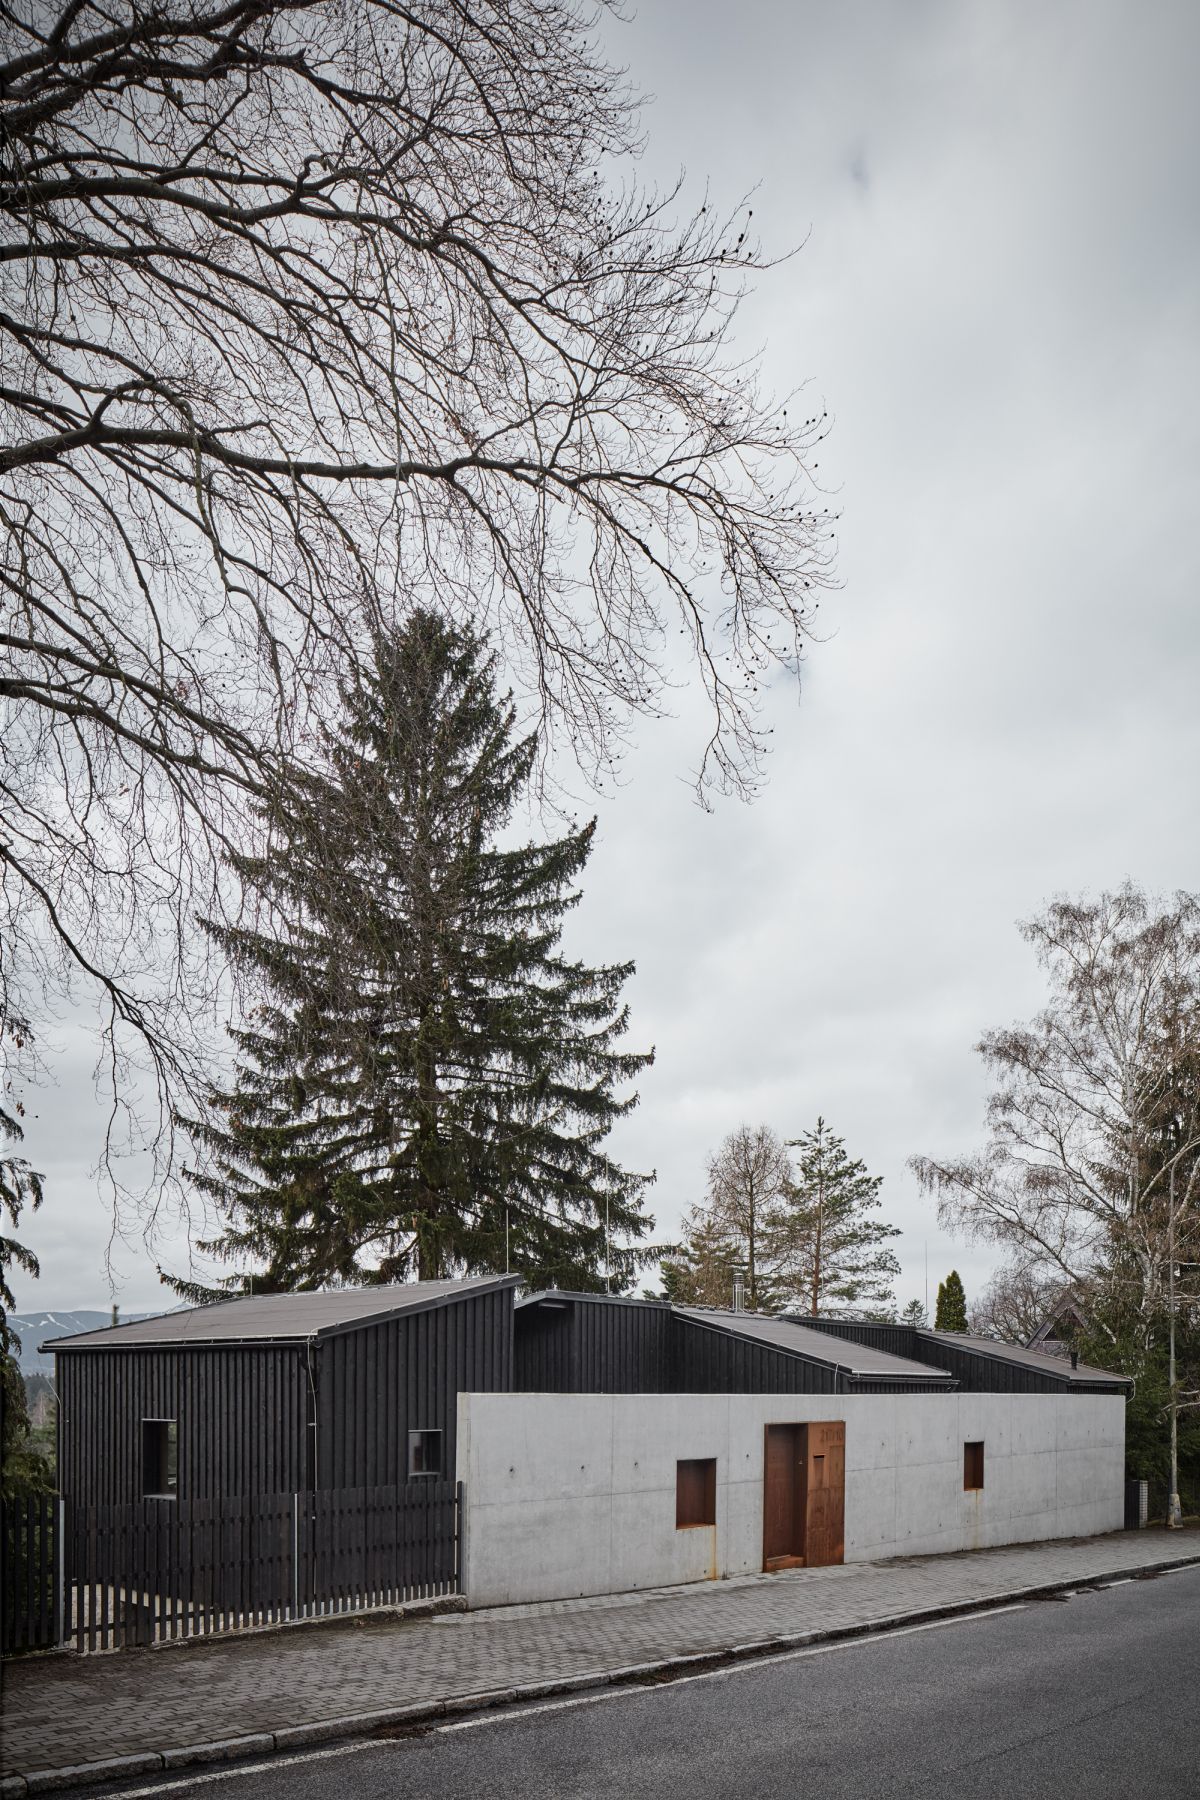 A concrete wall acts as a shield between the house and the road which borders it